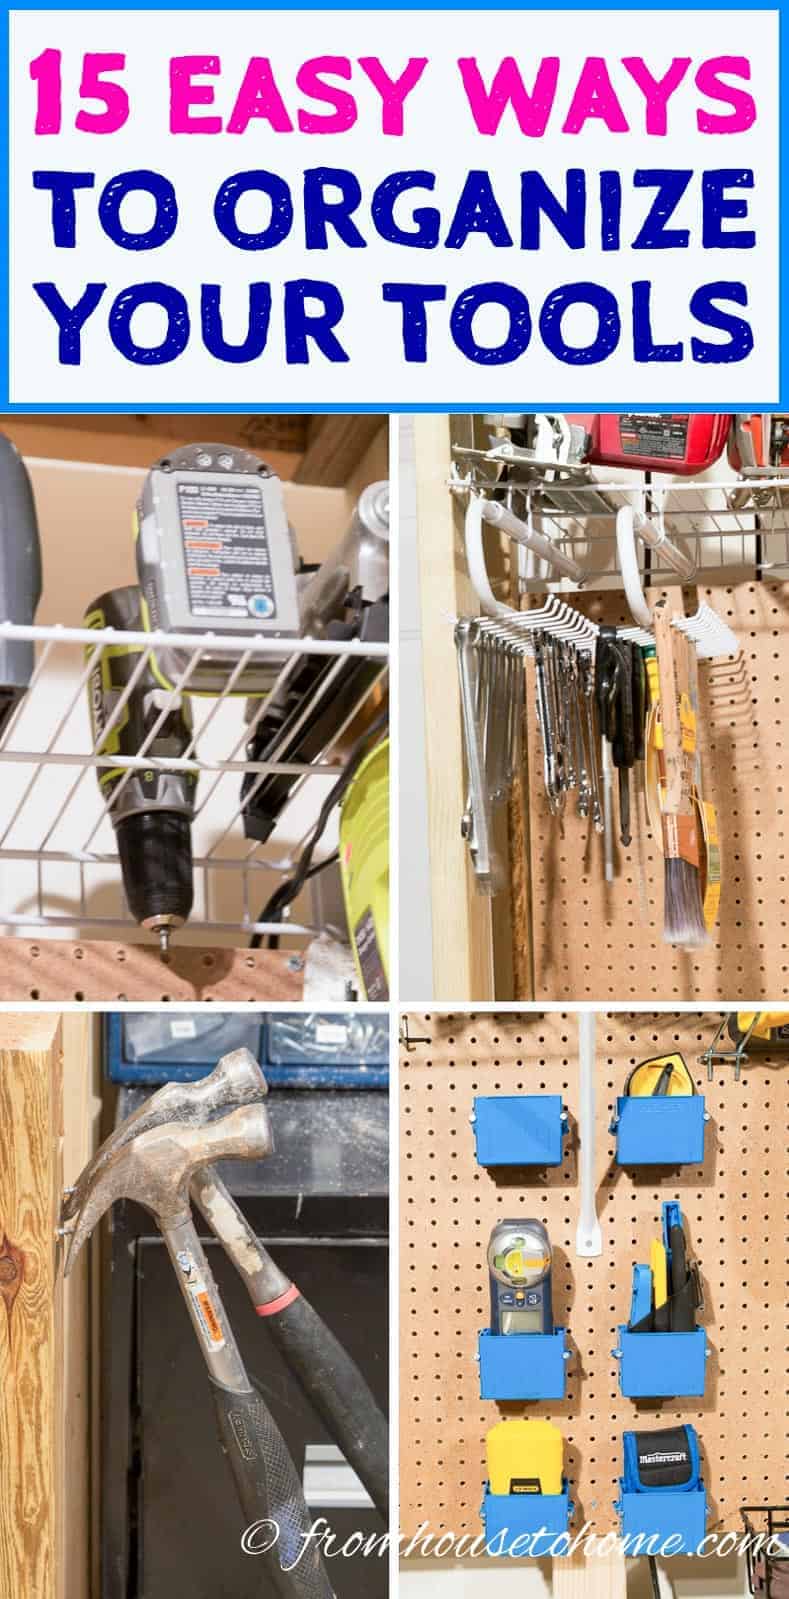 15 Clever Ways to Organize Tools (So You Can Find Them)